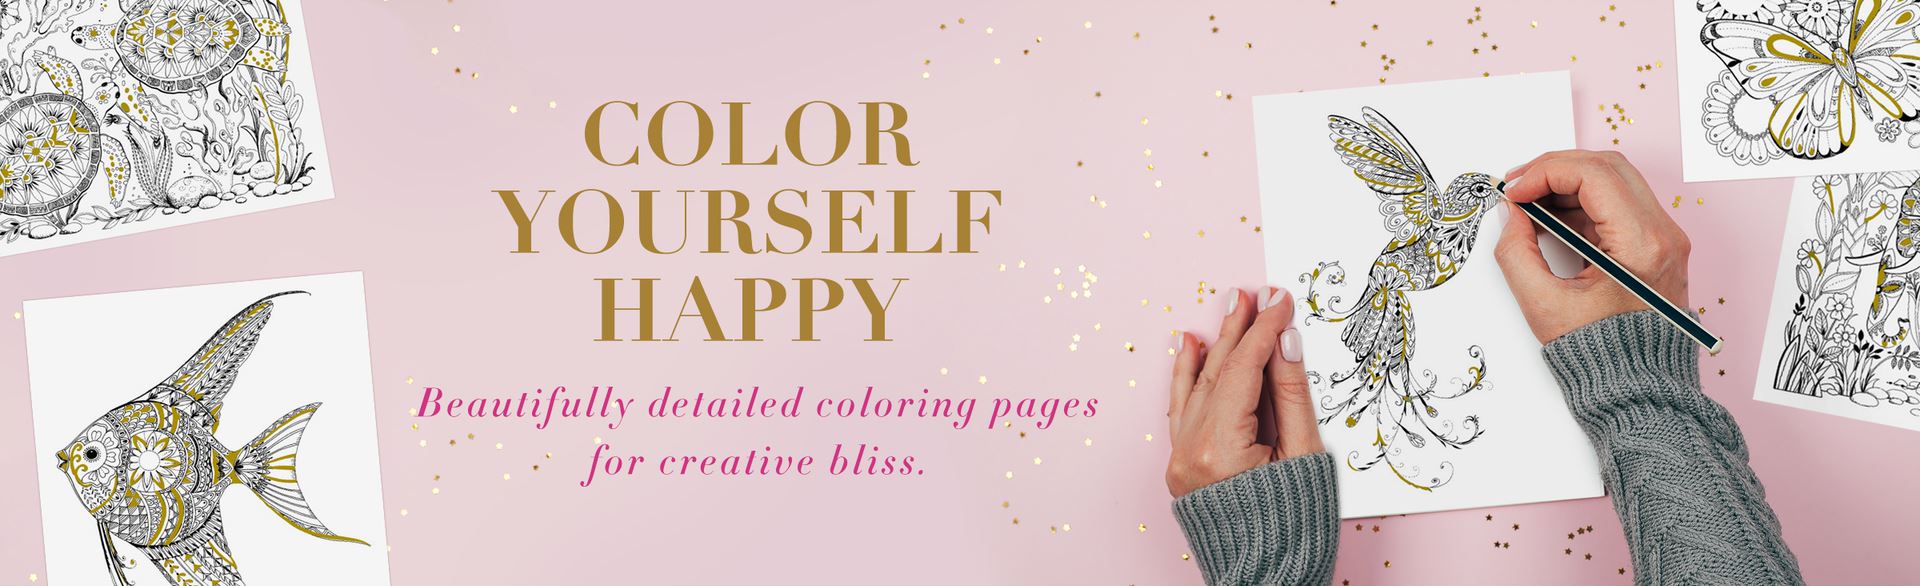 Color Yourself Happy Beautifully detailed coloring pages for creative bliss.